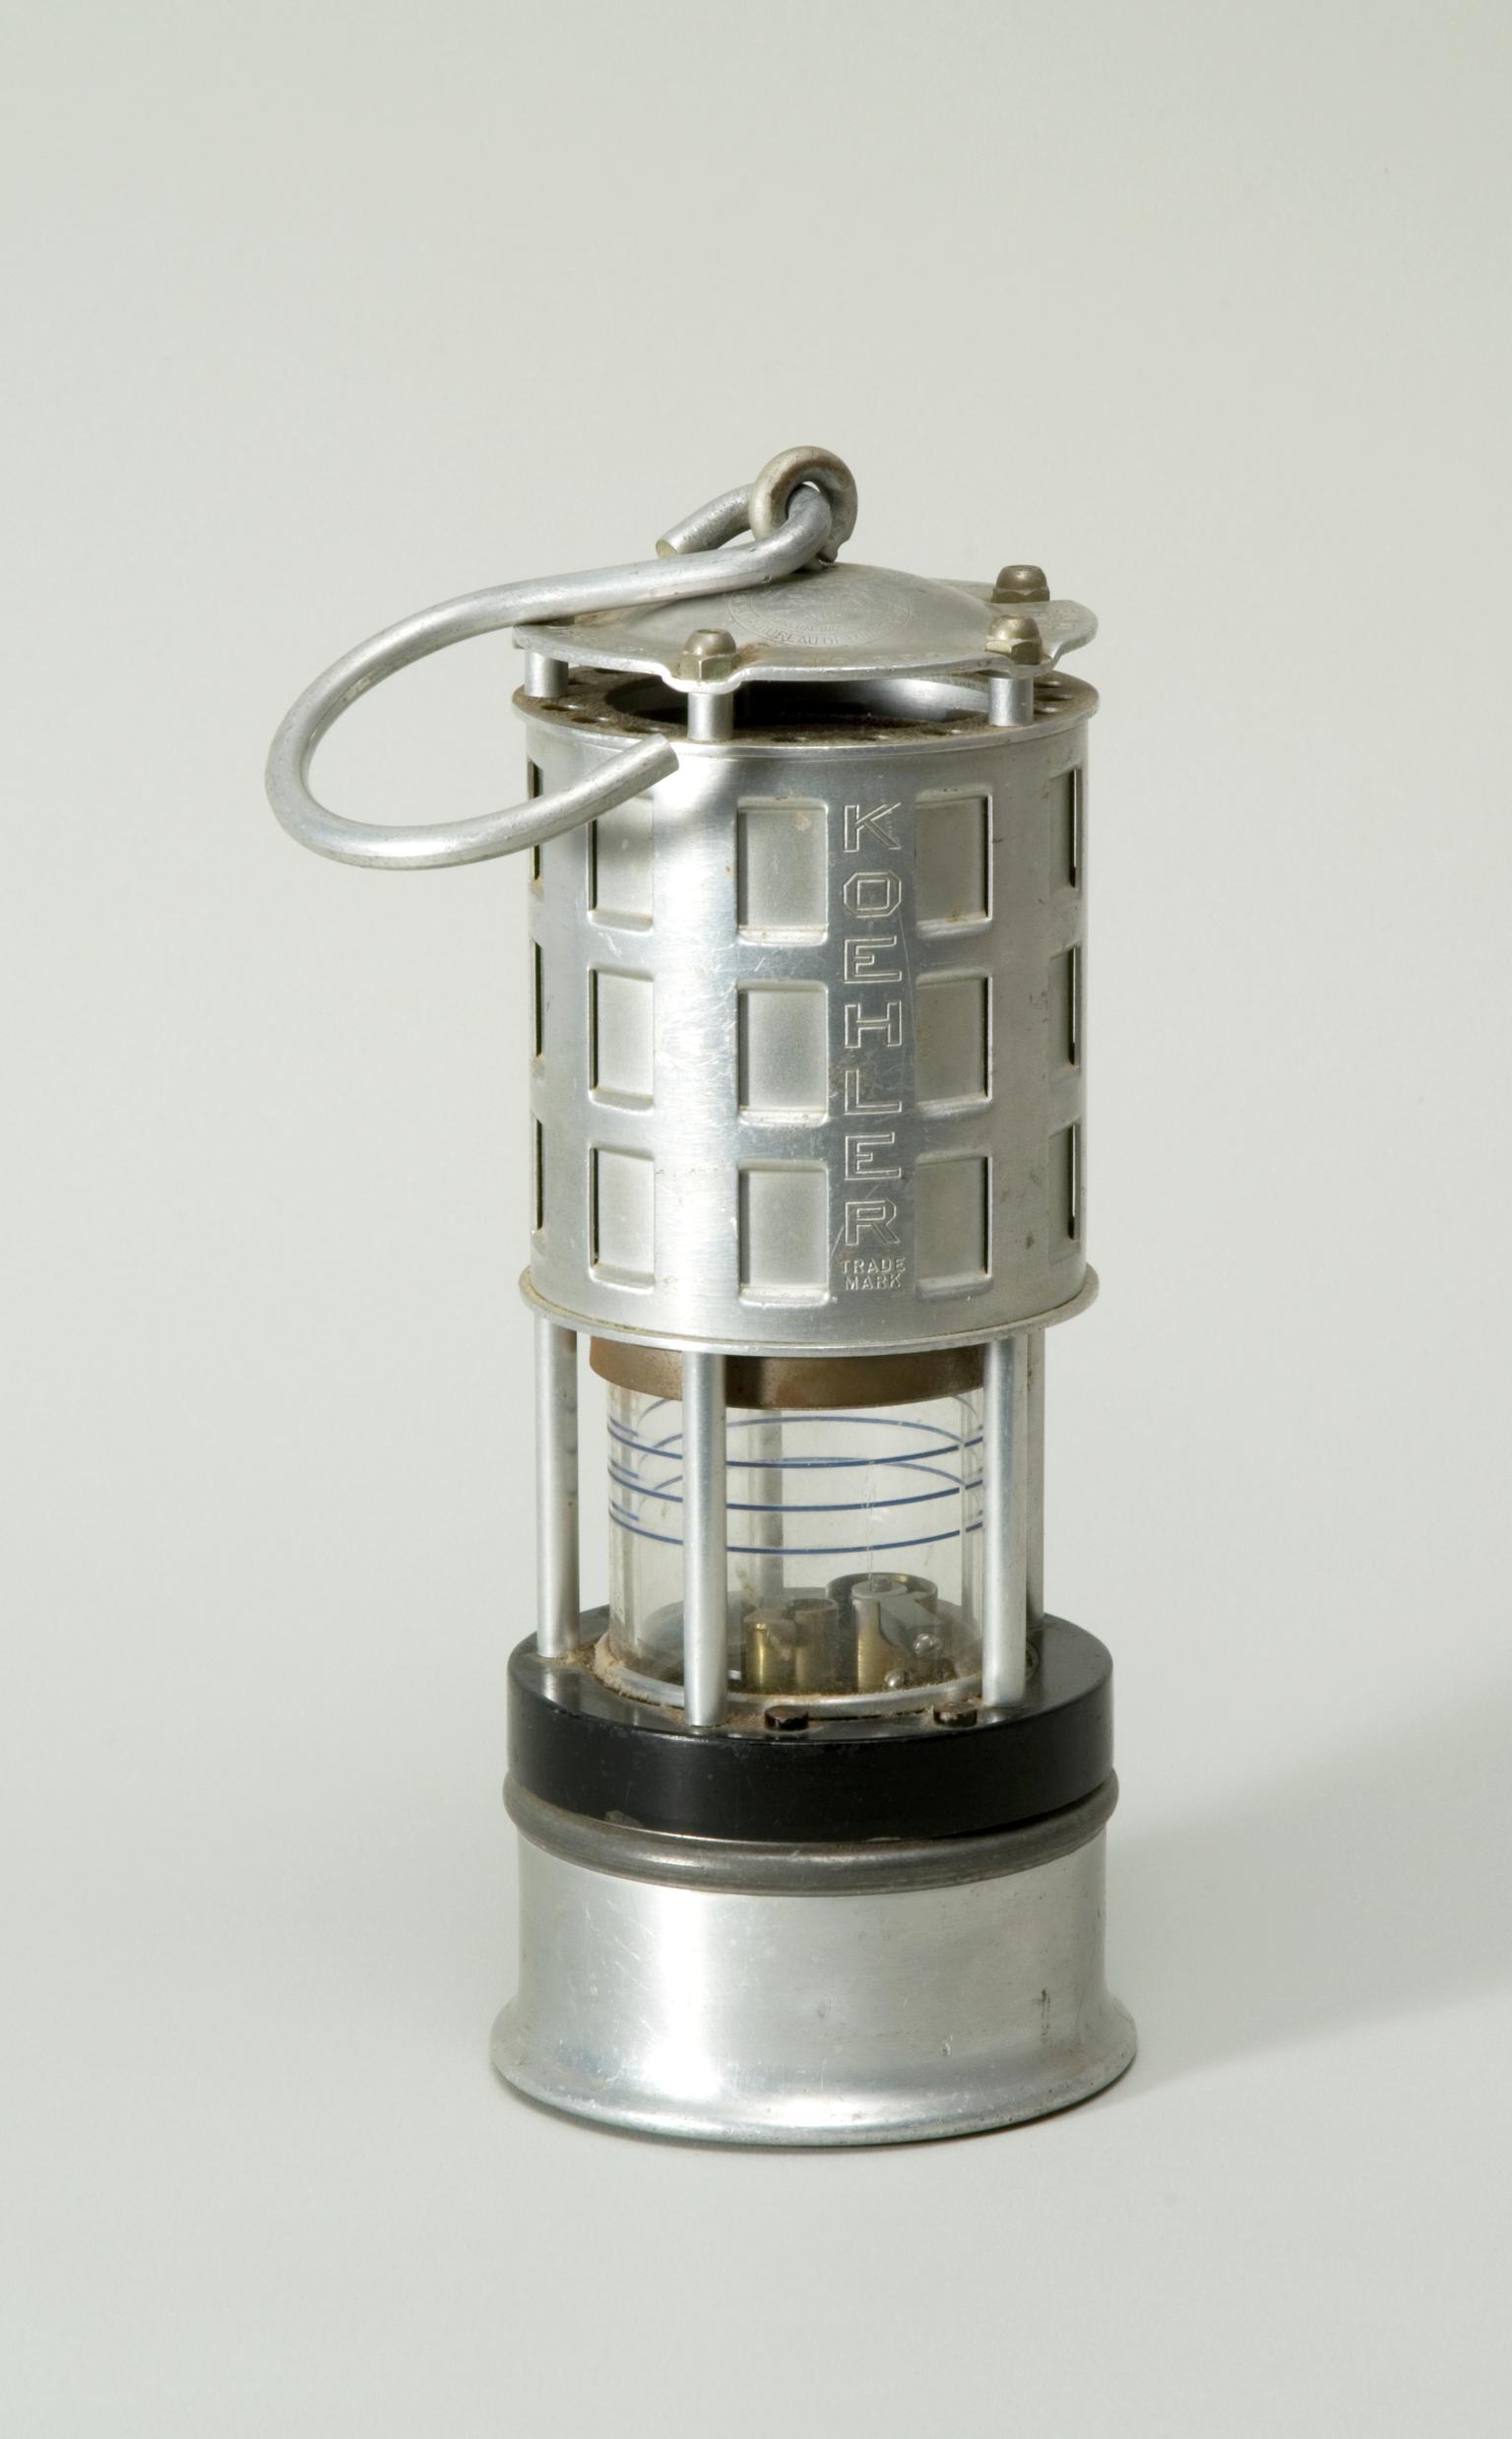 Bonneted flame safety lamp